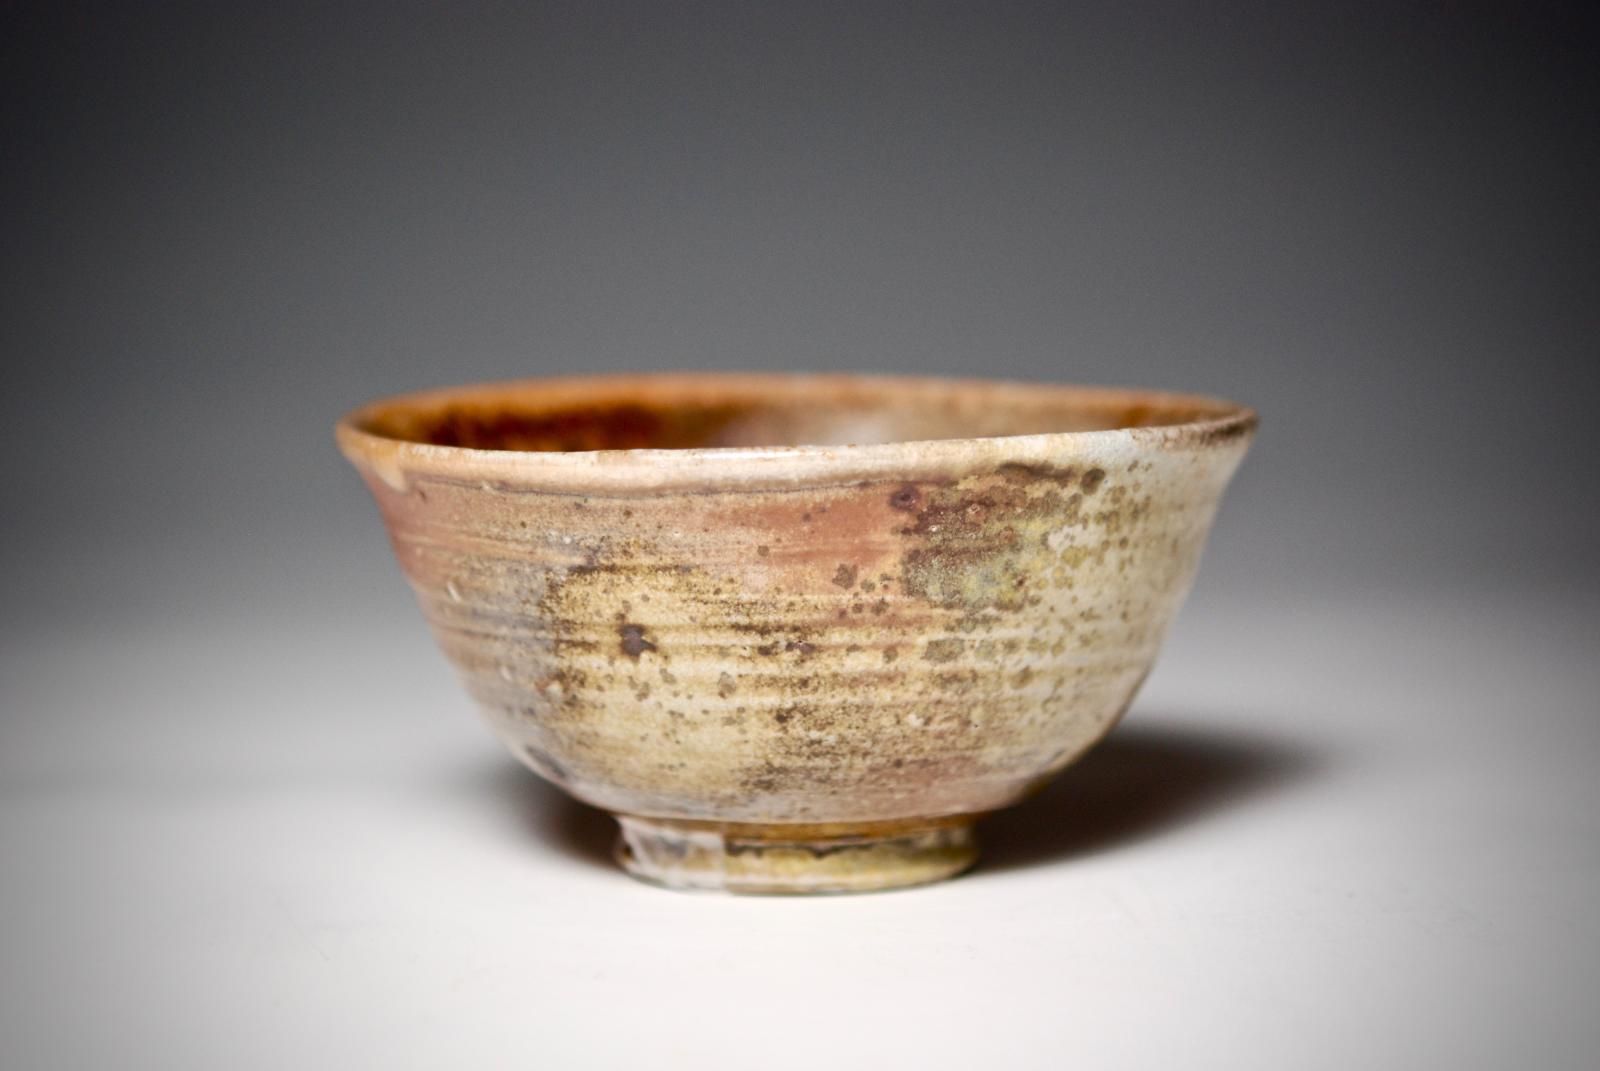 Kick wheel thrown chawan using local Devon clays, and then wood fired for four days in a ground hog type tunnel kiln.  Shino Glazed Interior, unglazed exterior. by Nic Collins